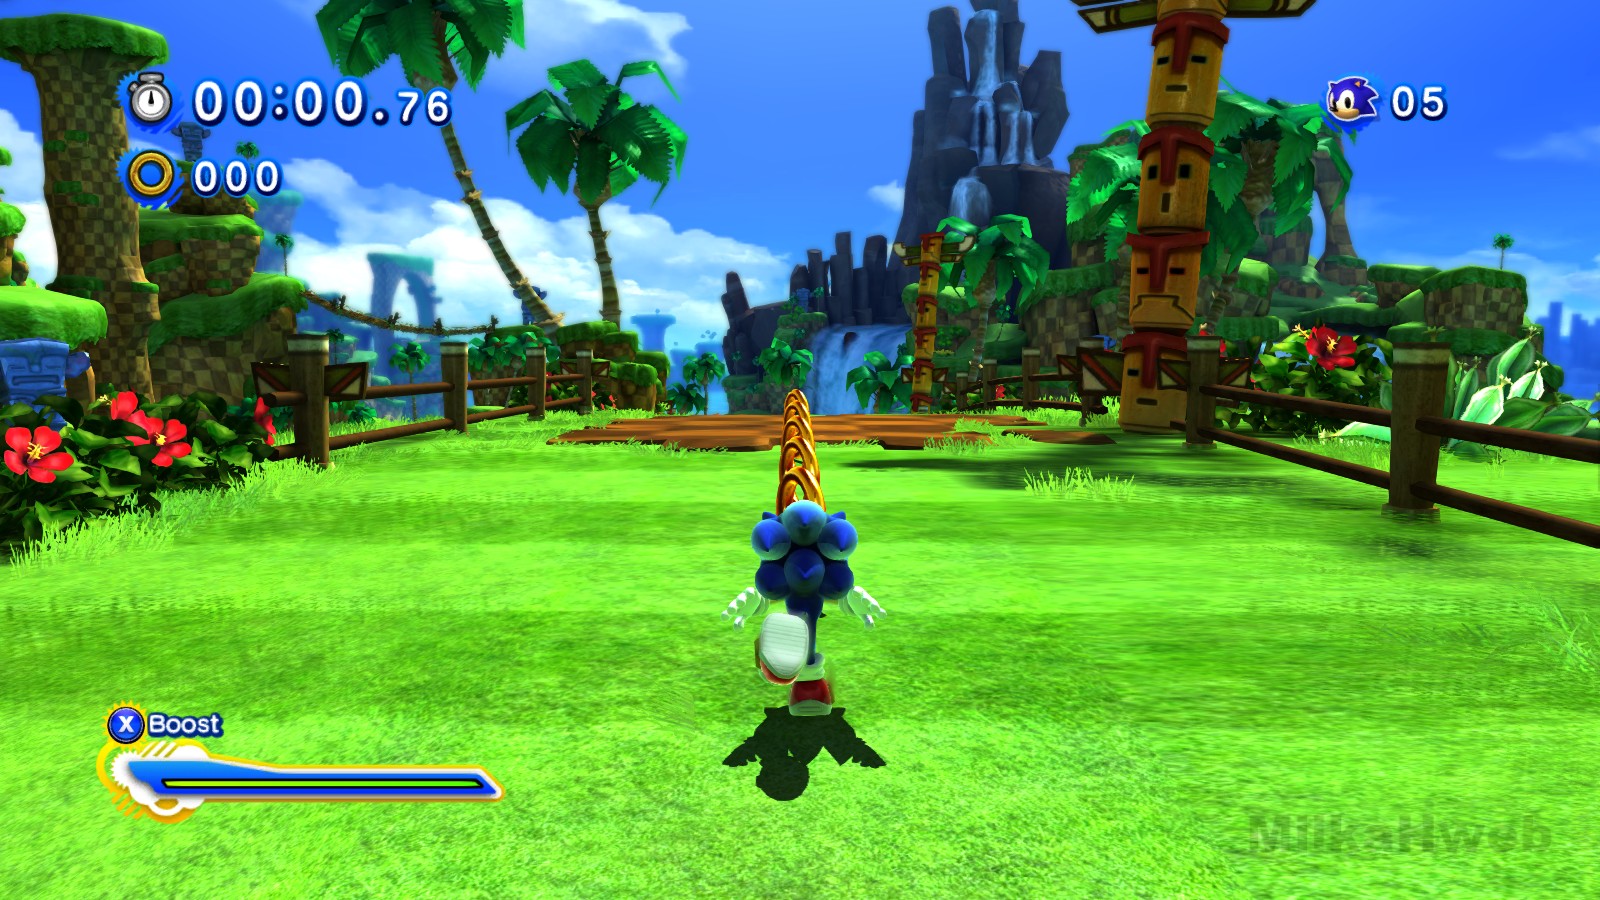 Screen cap of Sonic Generations Green Hill Zone level